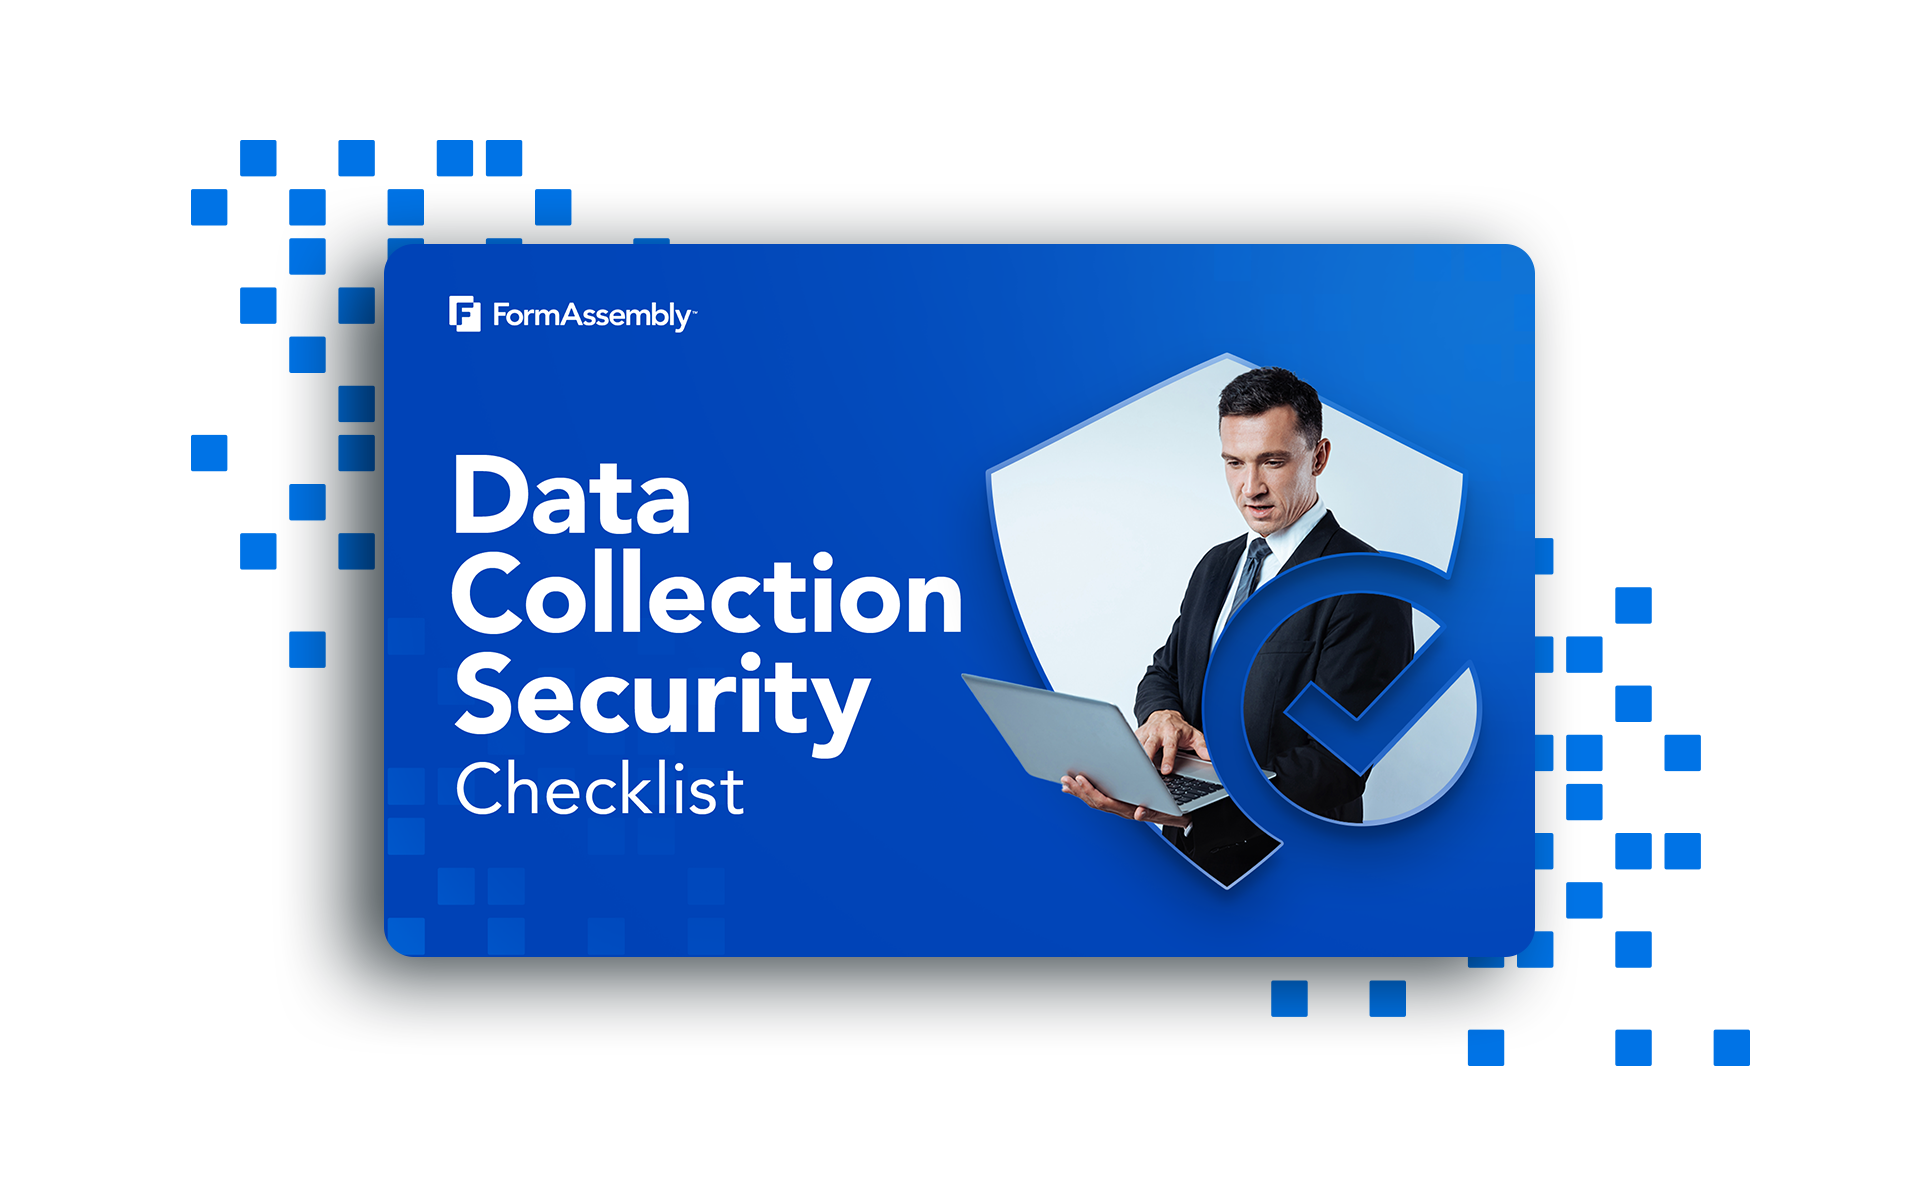 data collection security checklist image